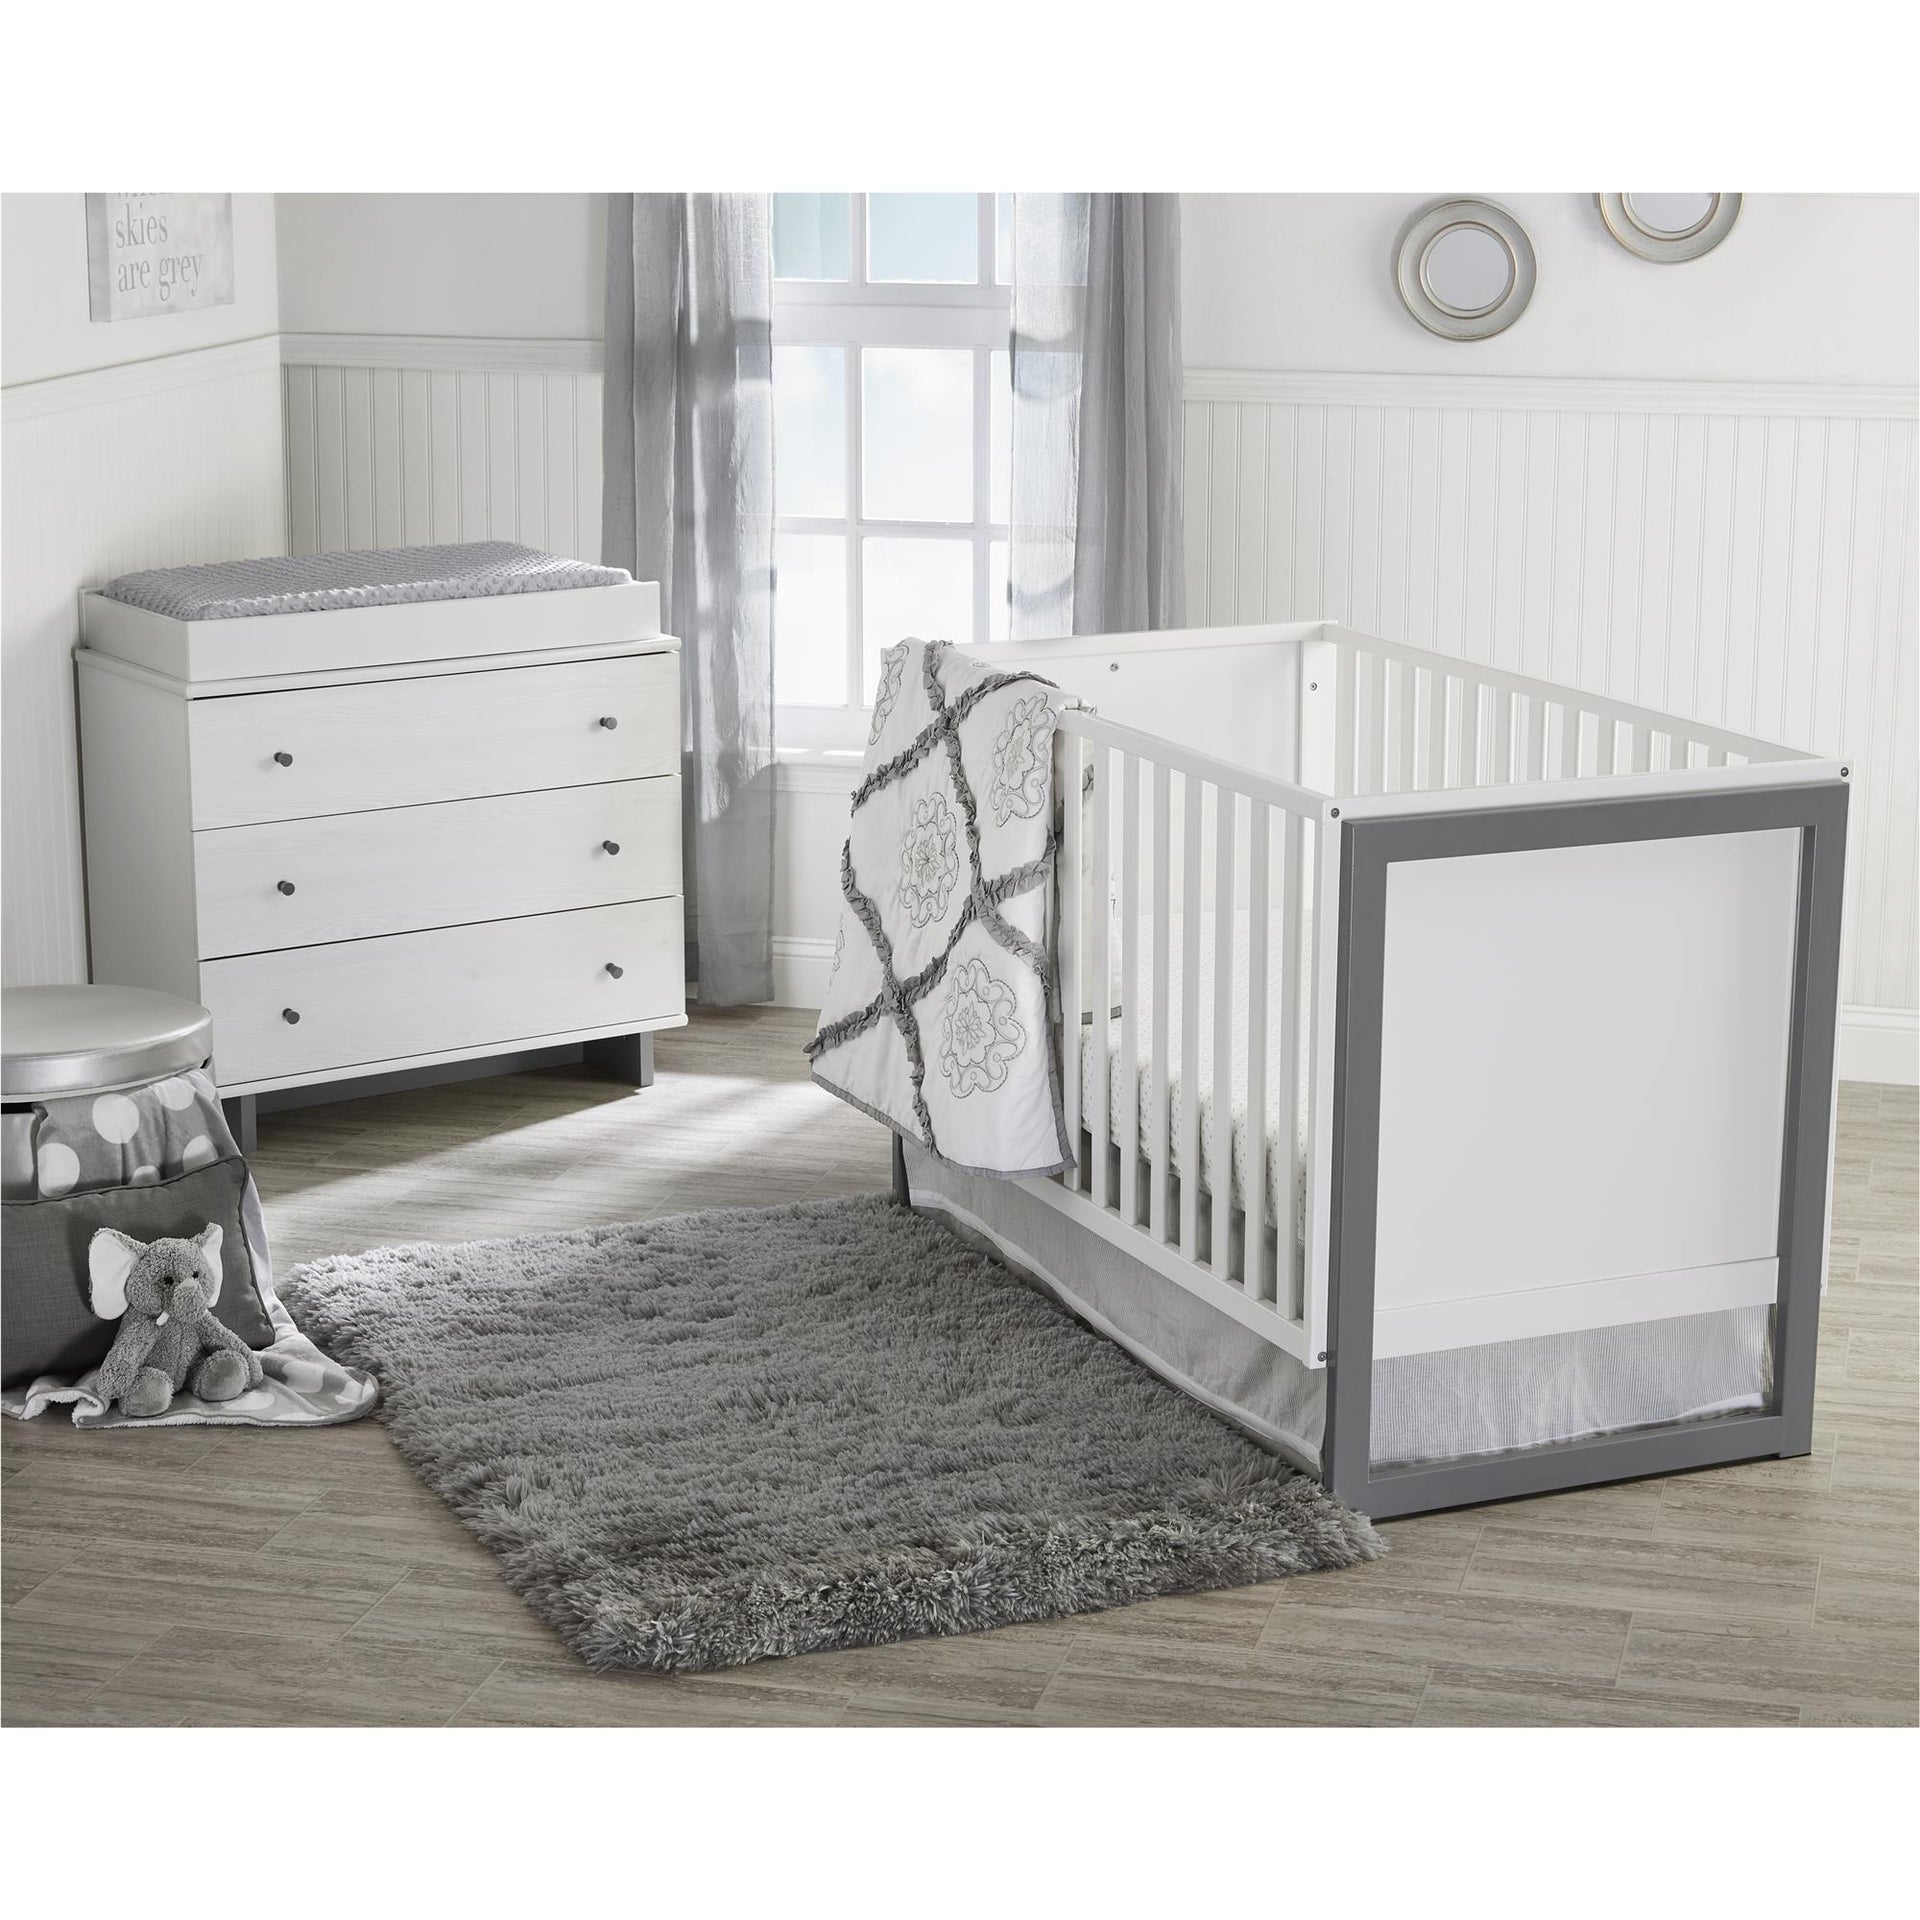 Changing Table Topper - White